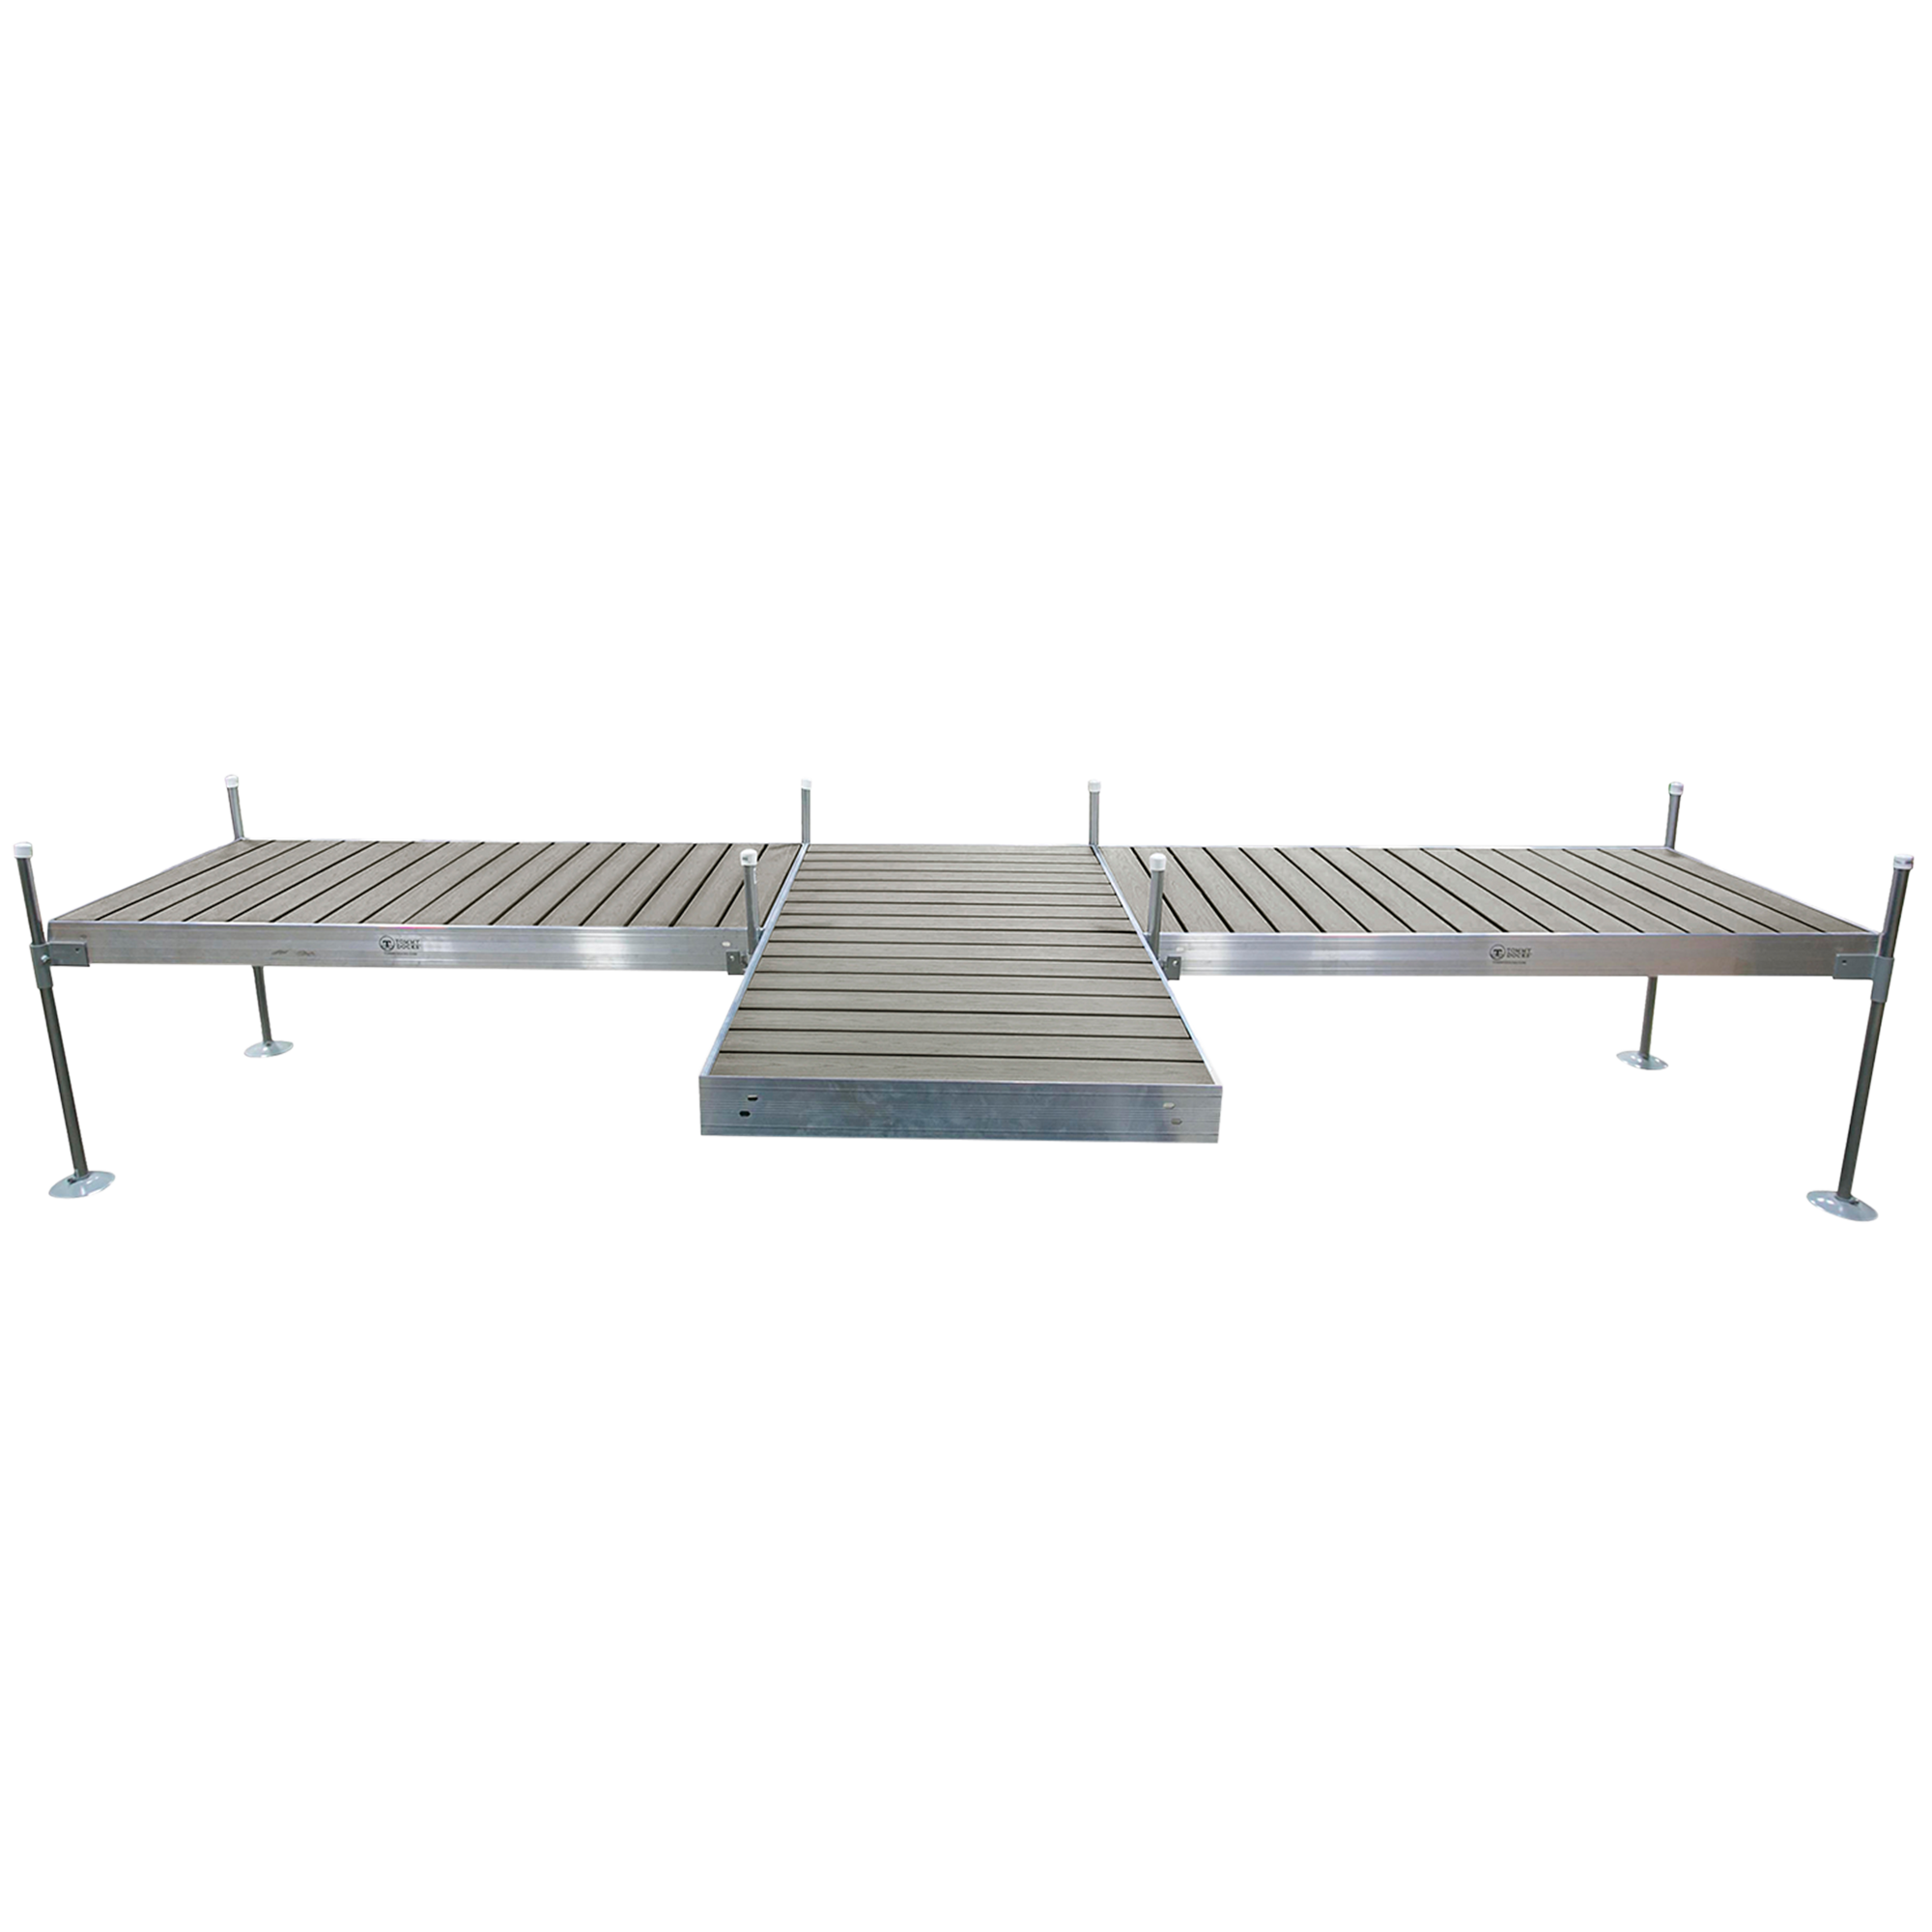 8' T-Shaped Boat Dock System with Aluminum Frame and Gray Composite Decking